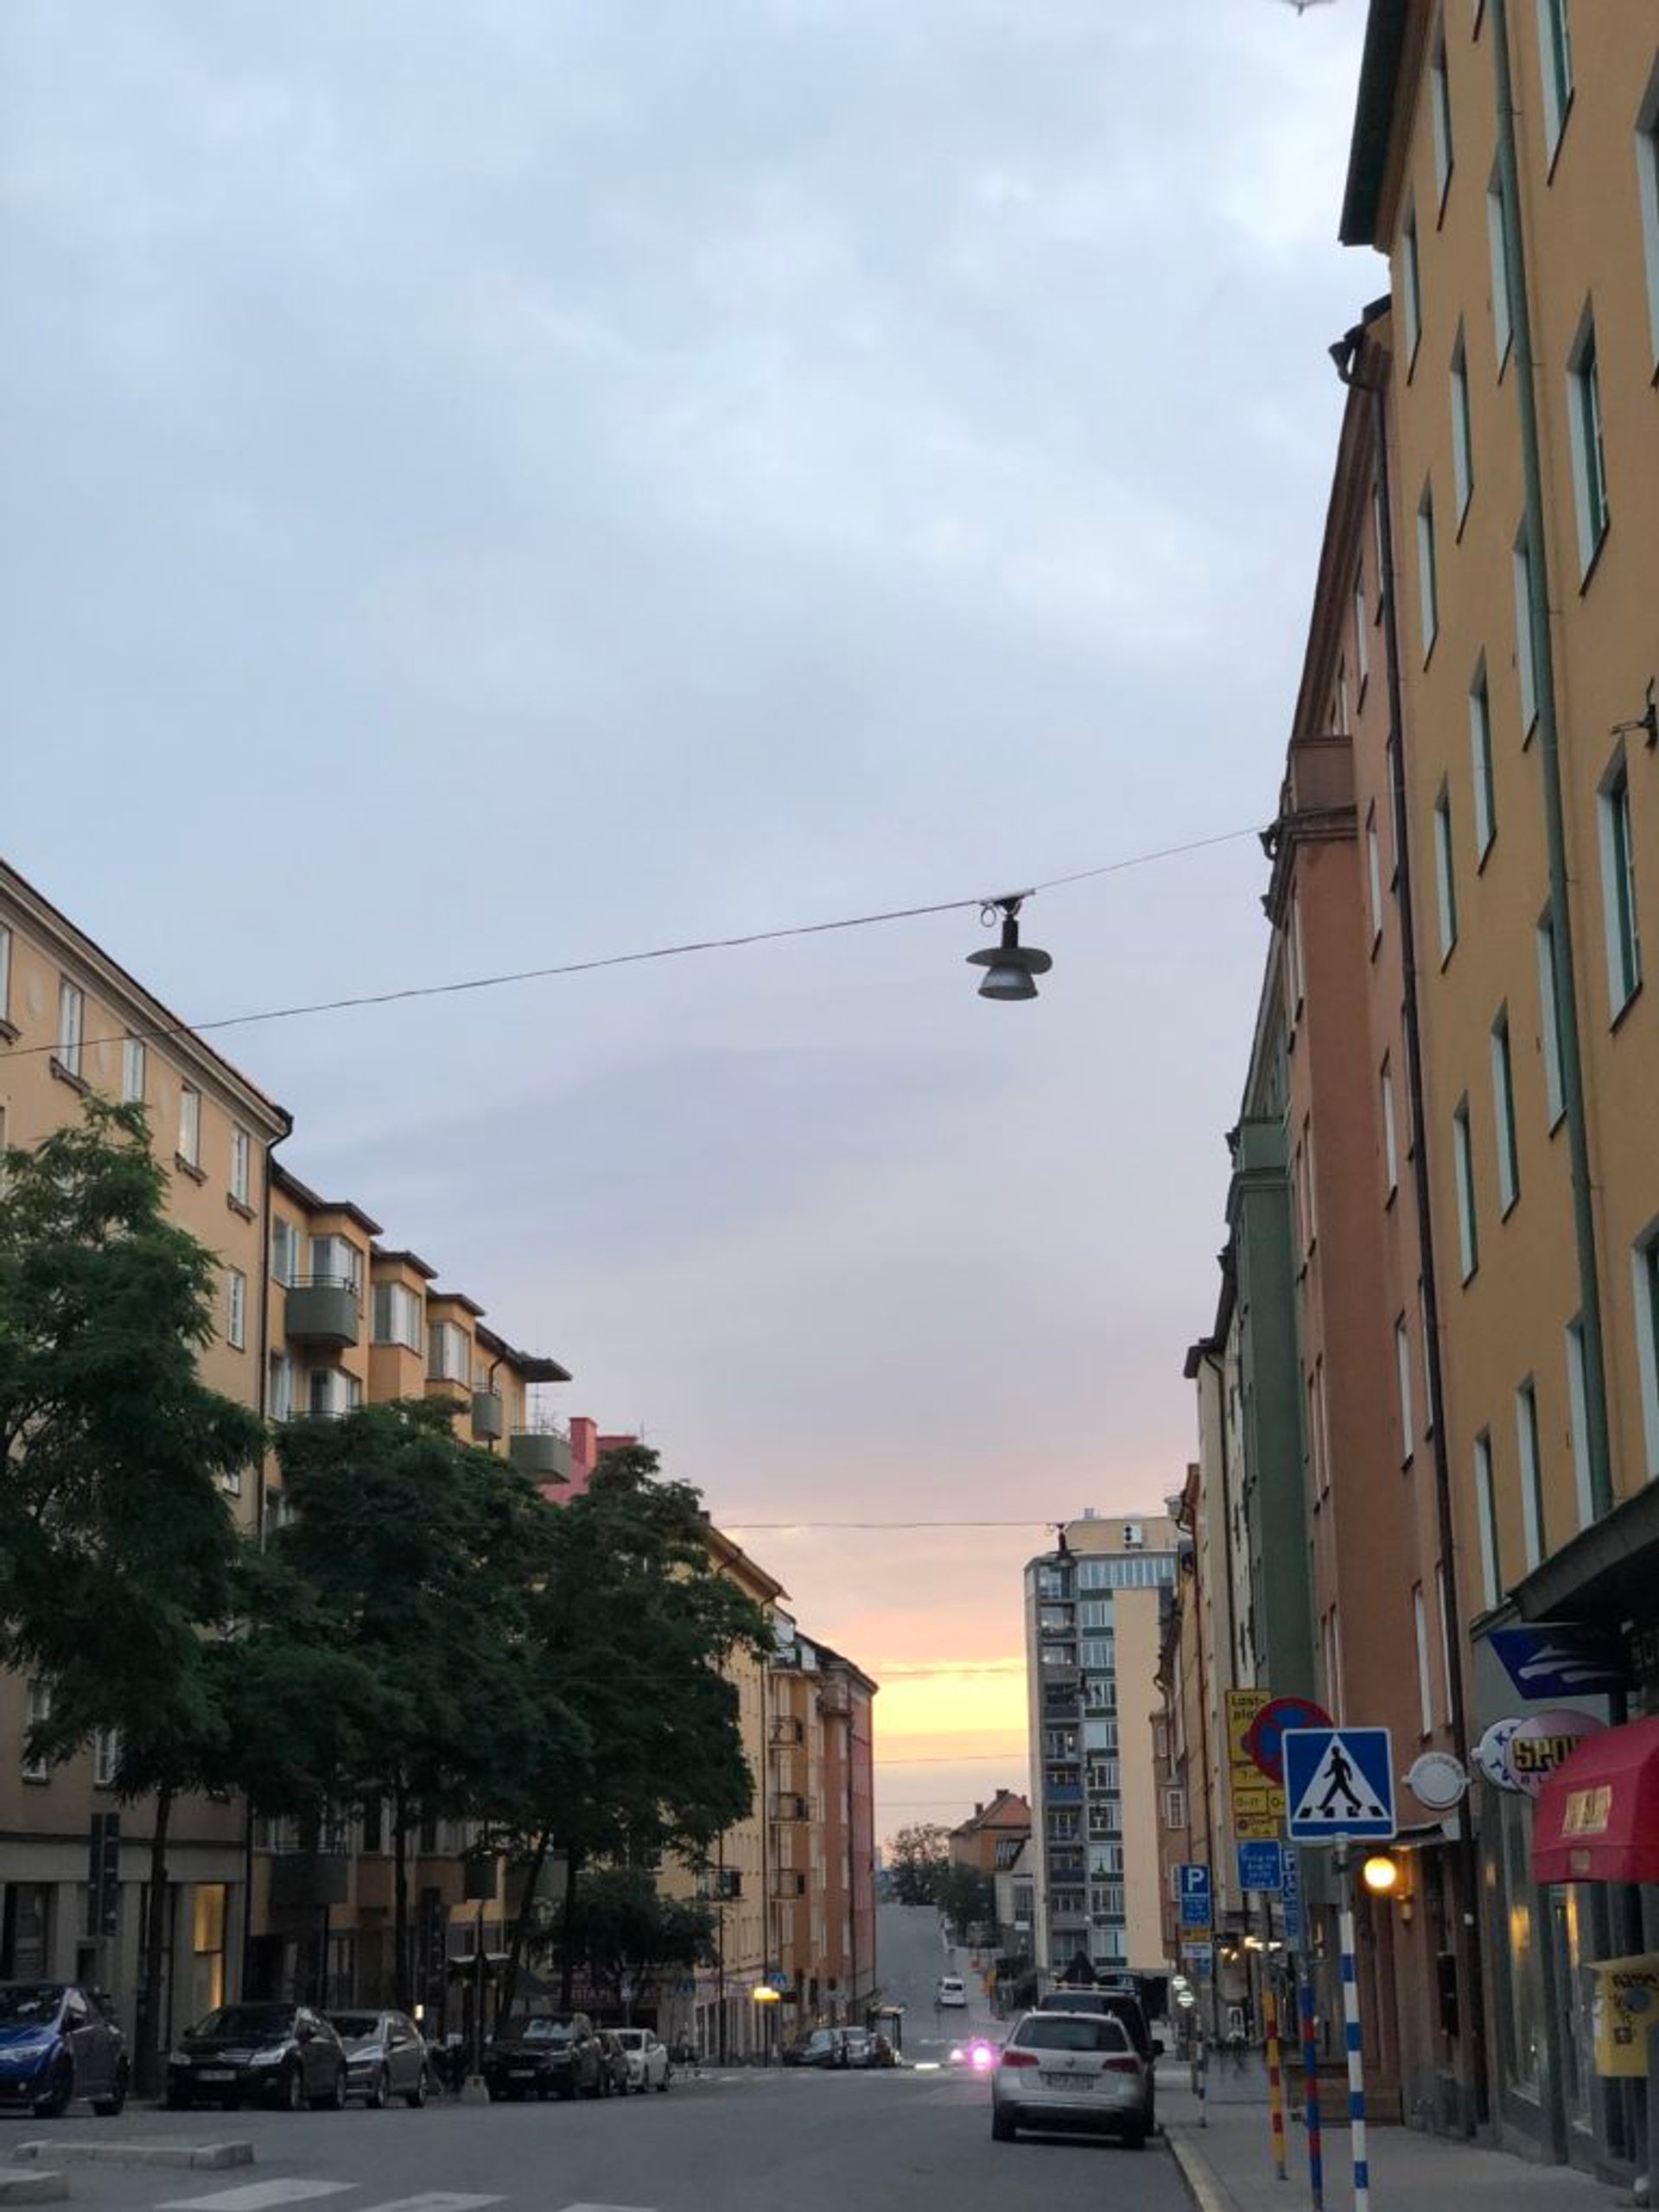 A 3am walk home in Stockholm, Summer 2019 